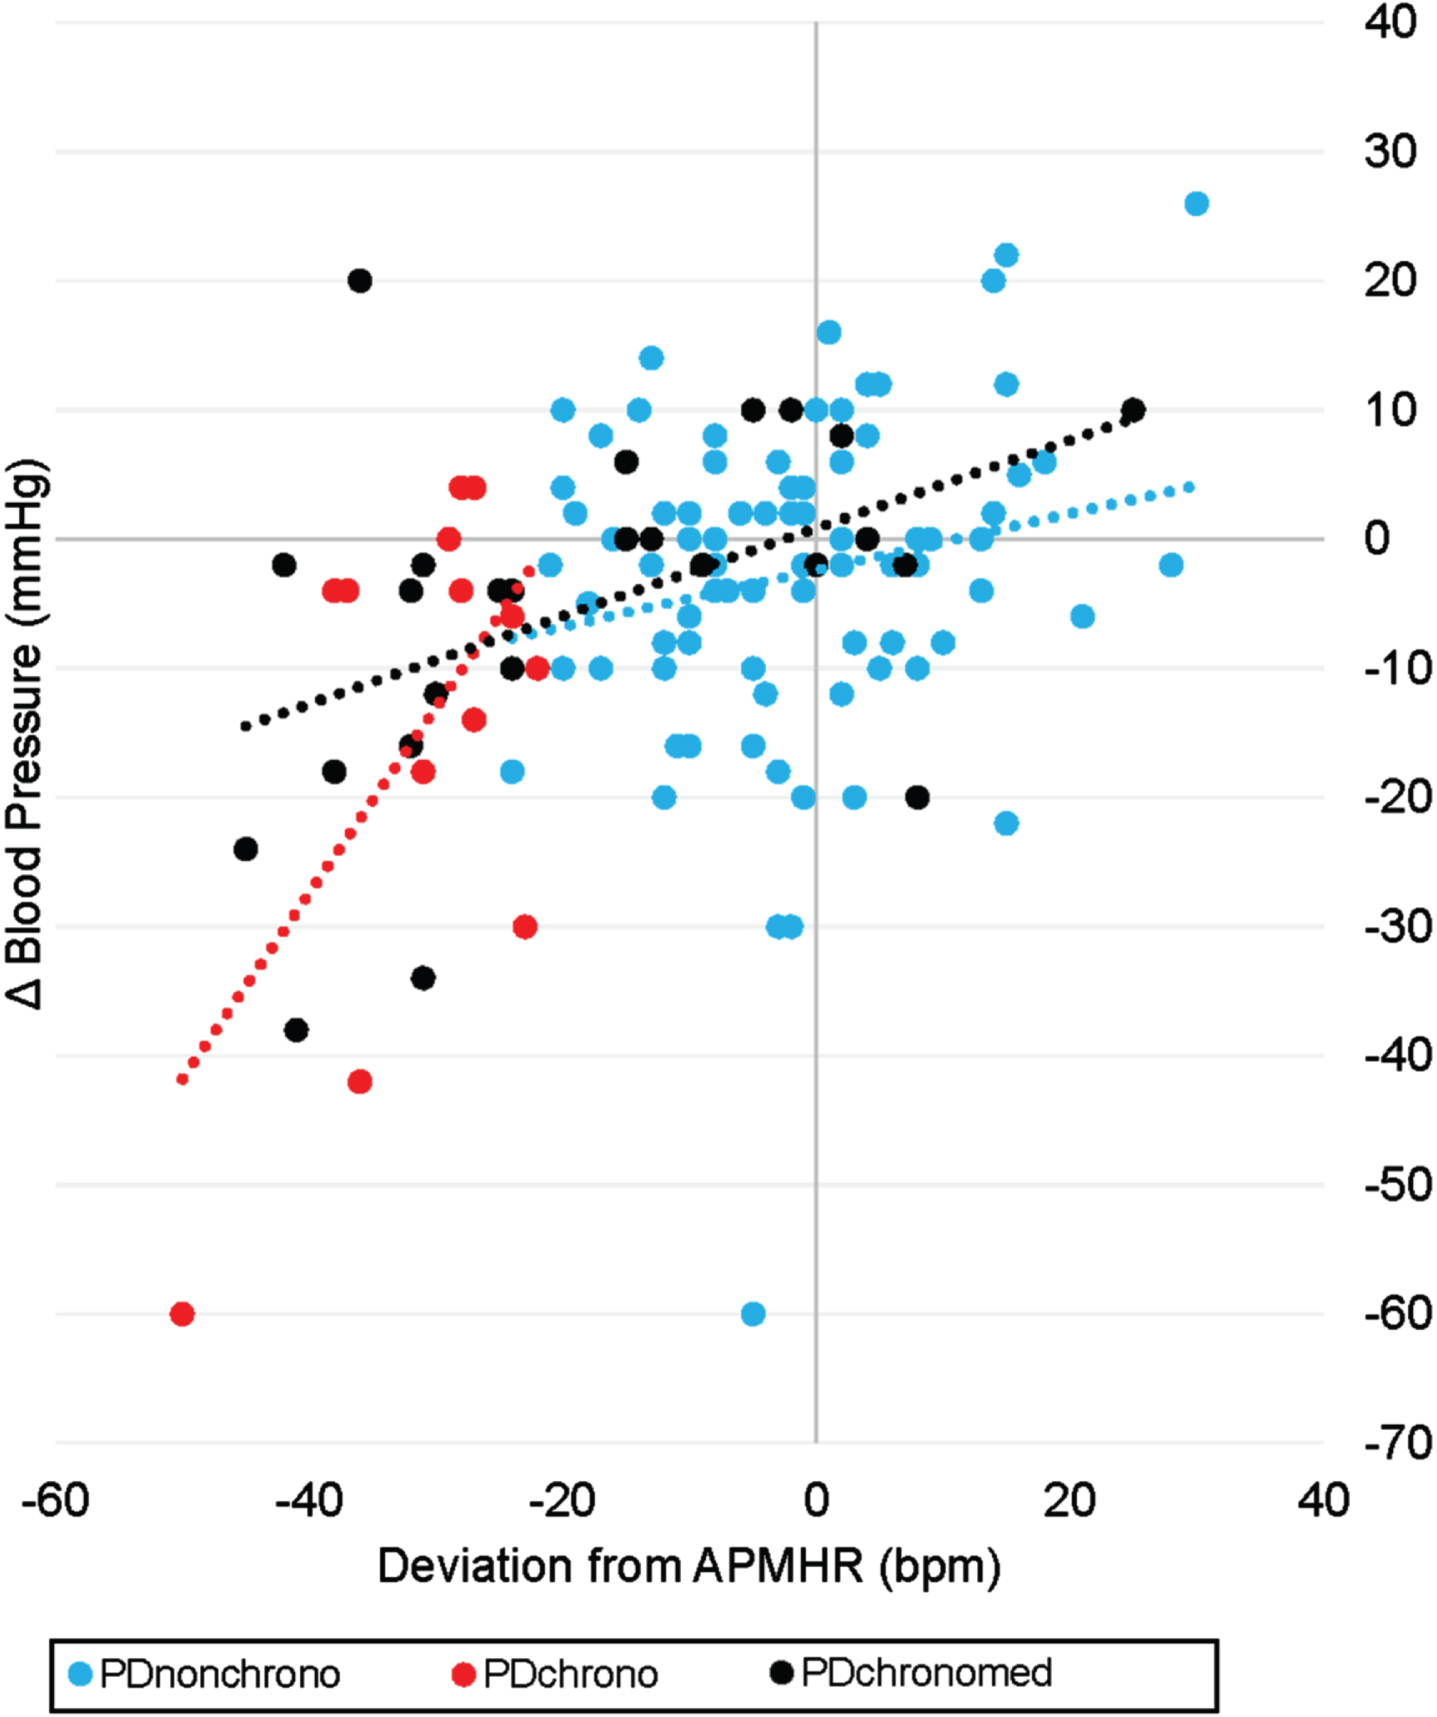 Association between systolic orthostatic blood pressure response (i.e., standing-lying SBP) and deviation from APMHR in study participants. PDnon-chrono (n = 87), PDchrono (n = 13), and PDchronomed (n = 25).